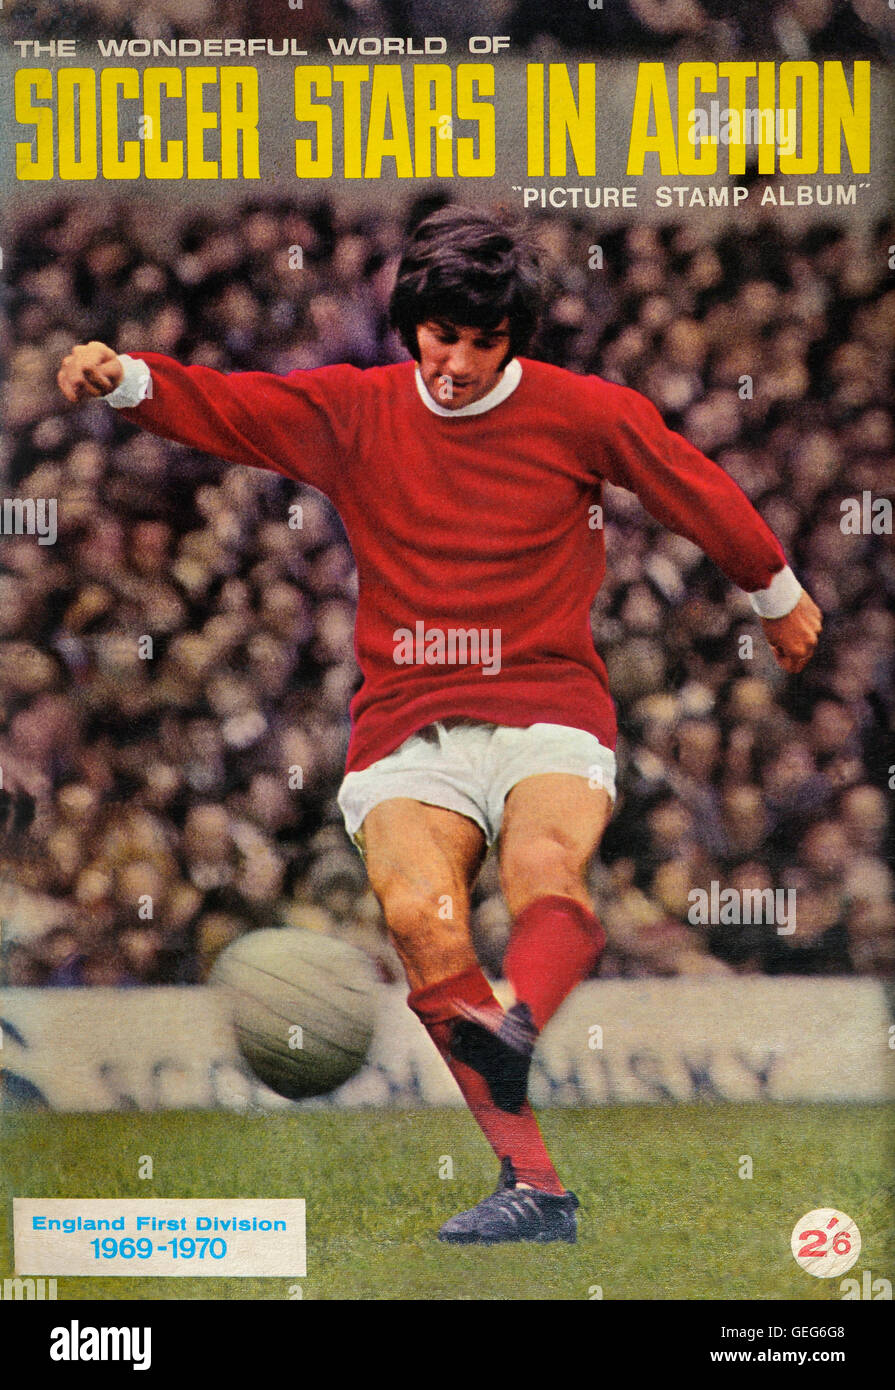 The wonderful world of soccer stars in action picture stamp album front cover of George Best. 1969-1970 Stock Photo